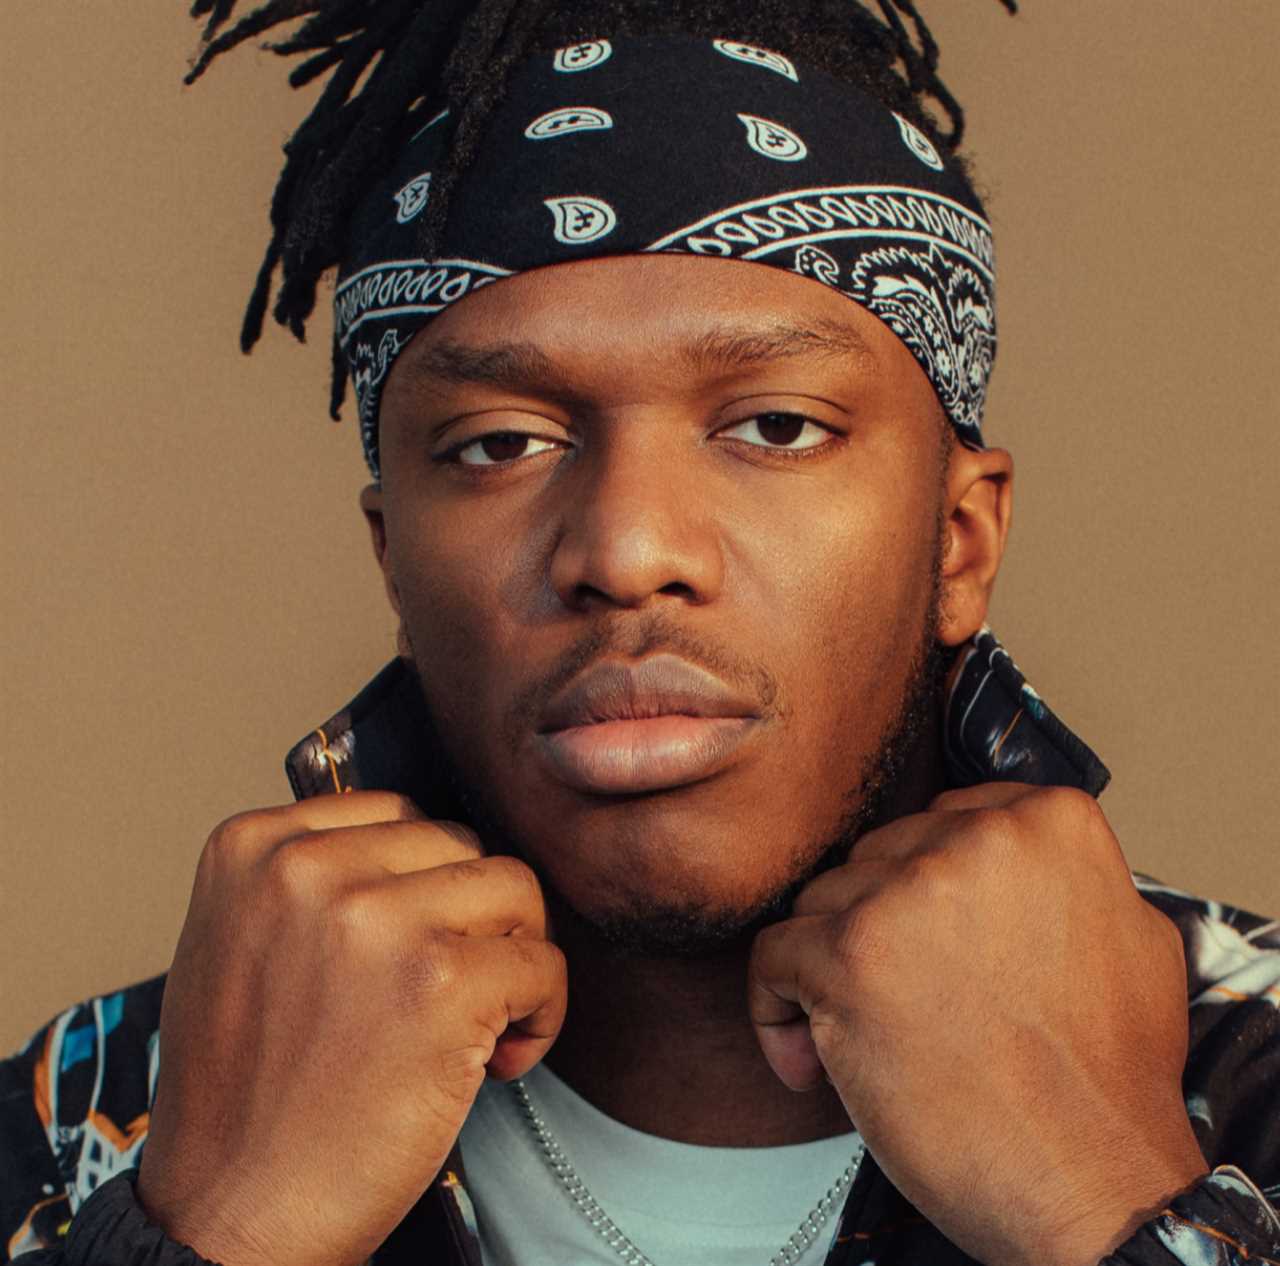 KSI is performing special album ‘launch party’ INSIDE Roblox